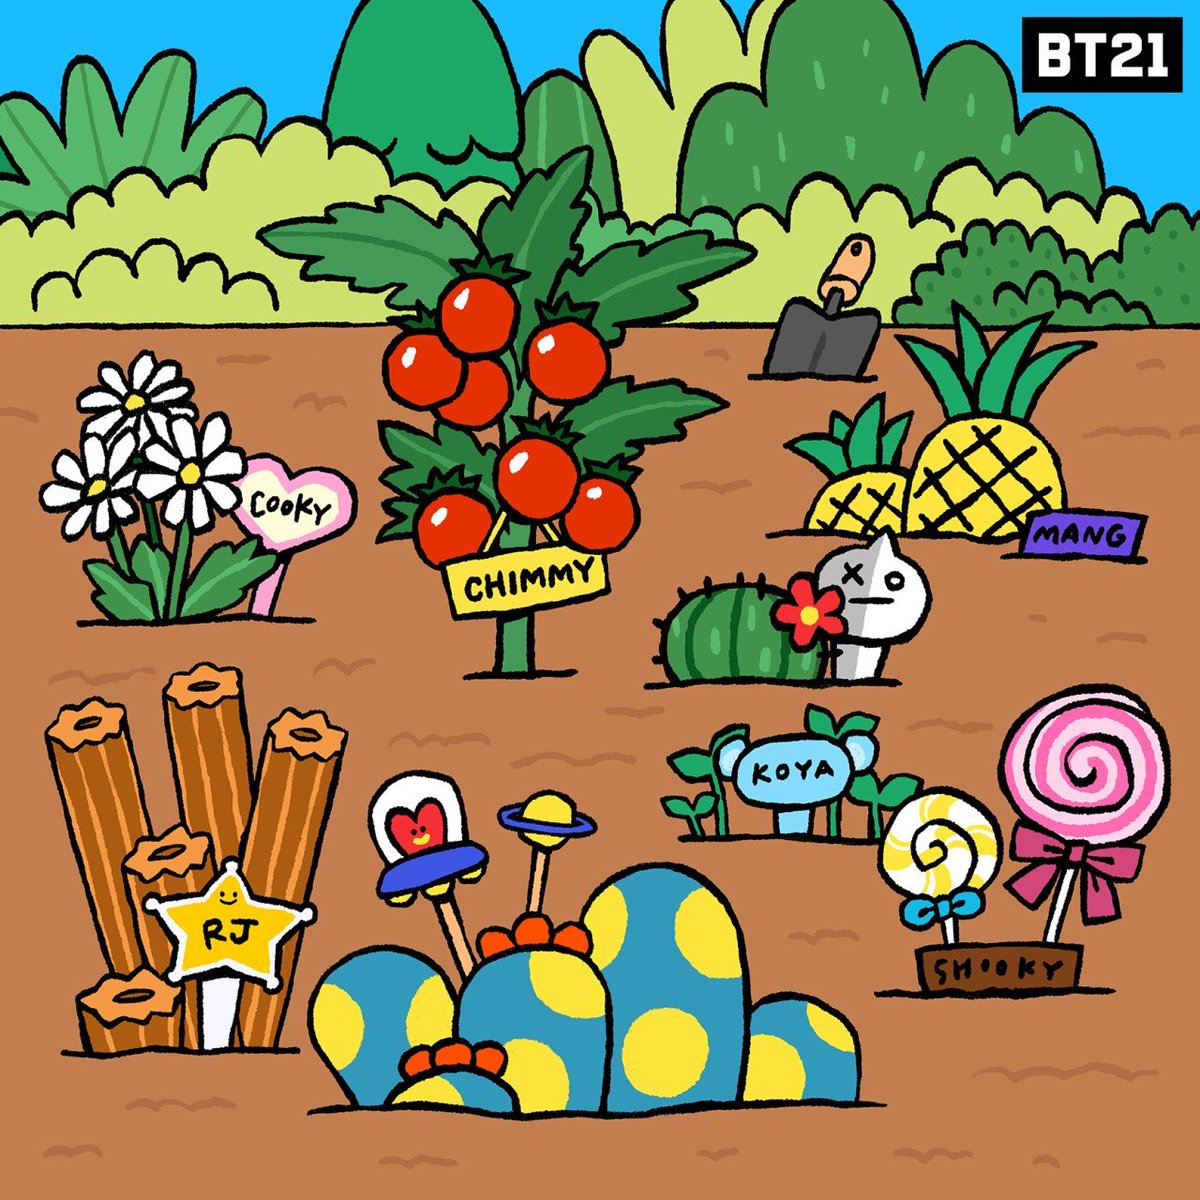 They say as you sow, so shall you reap. These are a few of our favorite things 😜
#RJ #Garden #BT21_UNIVERSE #BT21